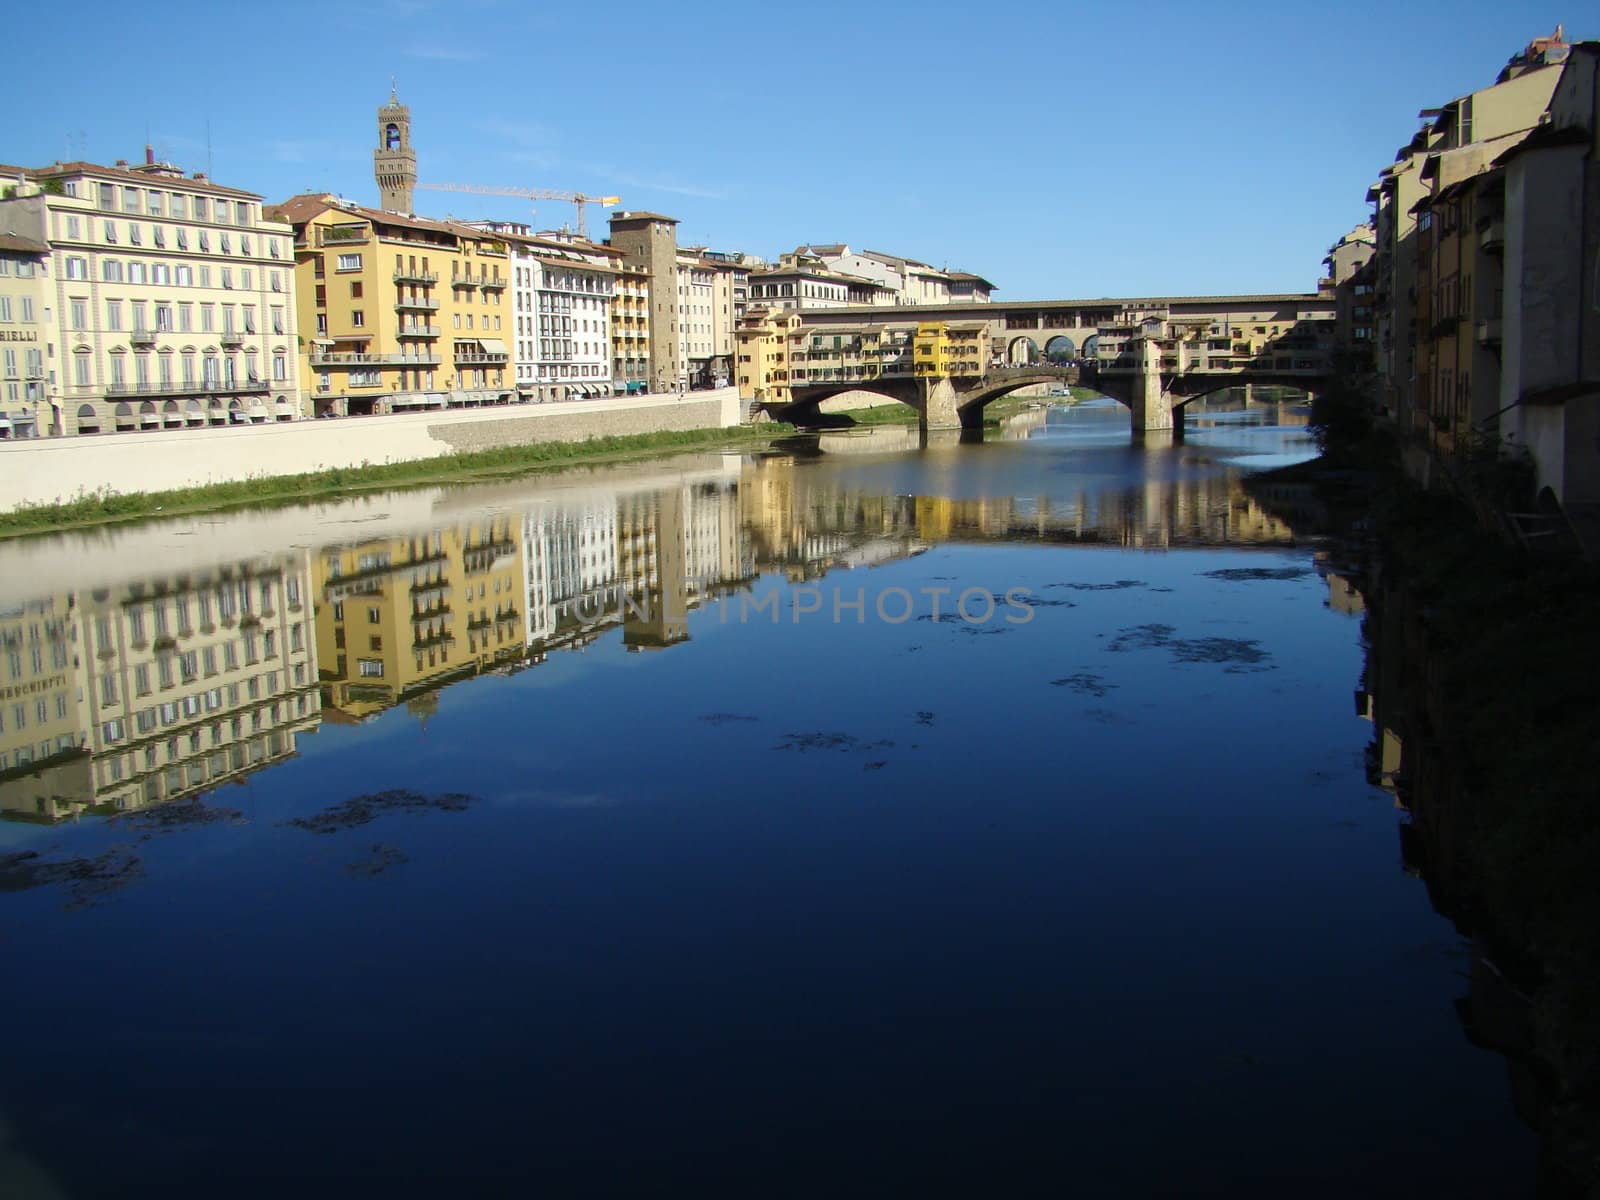 panorama of Florence with Ponte Vecchio, Tuscany, Italy.